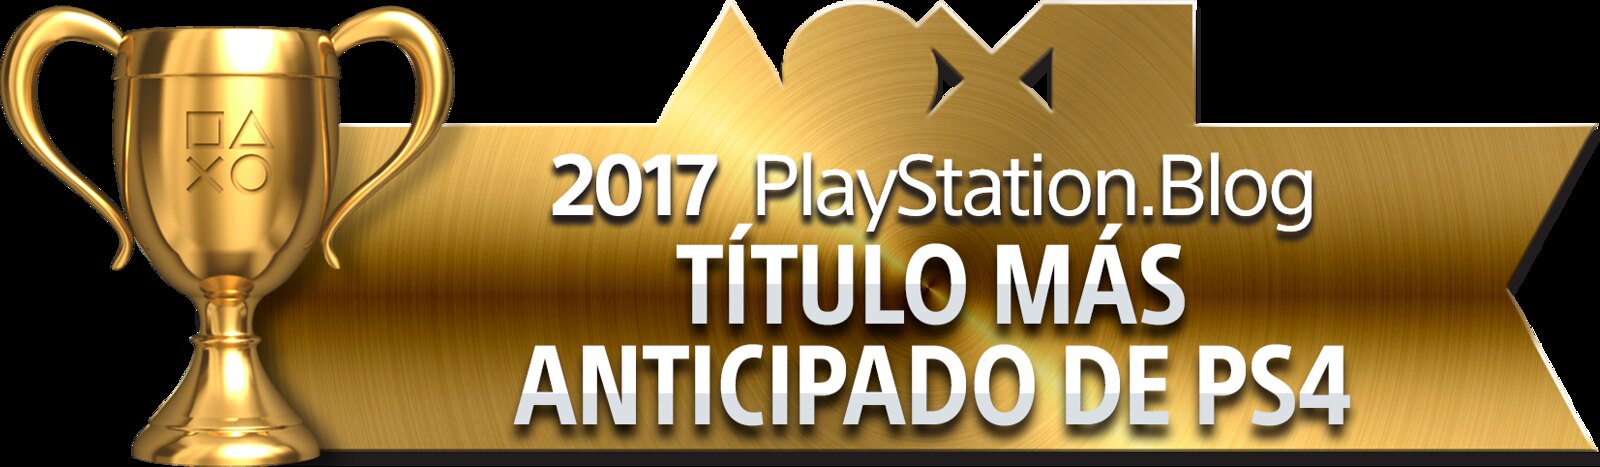 PlayStation Blog Game of the Year 2017 - Most Anticipated PS4 Title (Gold)